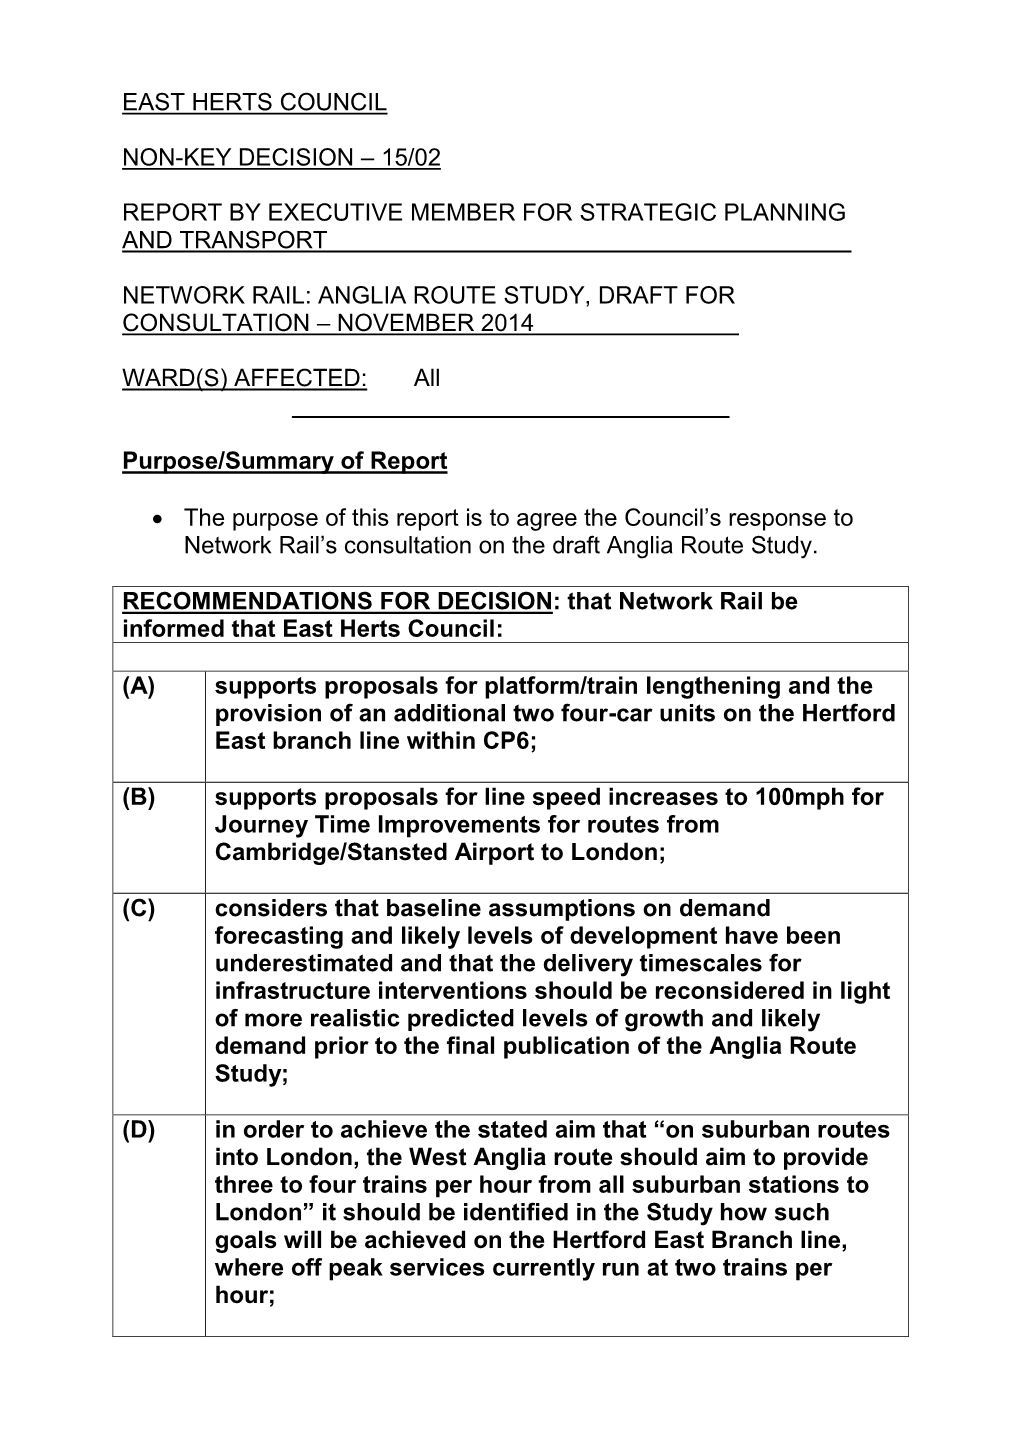 Anglia Route Study Consultation Document (Which Includes a 13 Page Executive Summary) Is Available Via the Link at the Background Papers Section of This Report